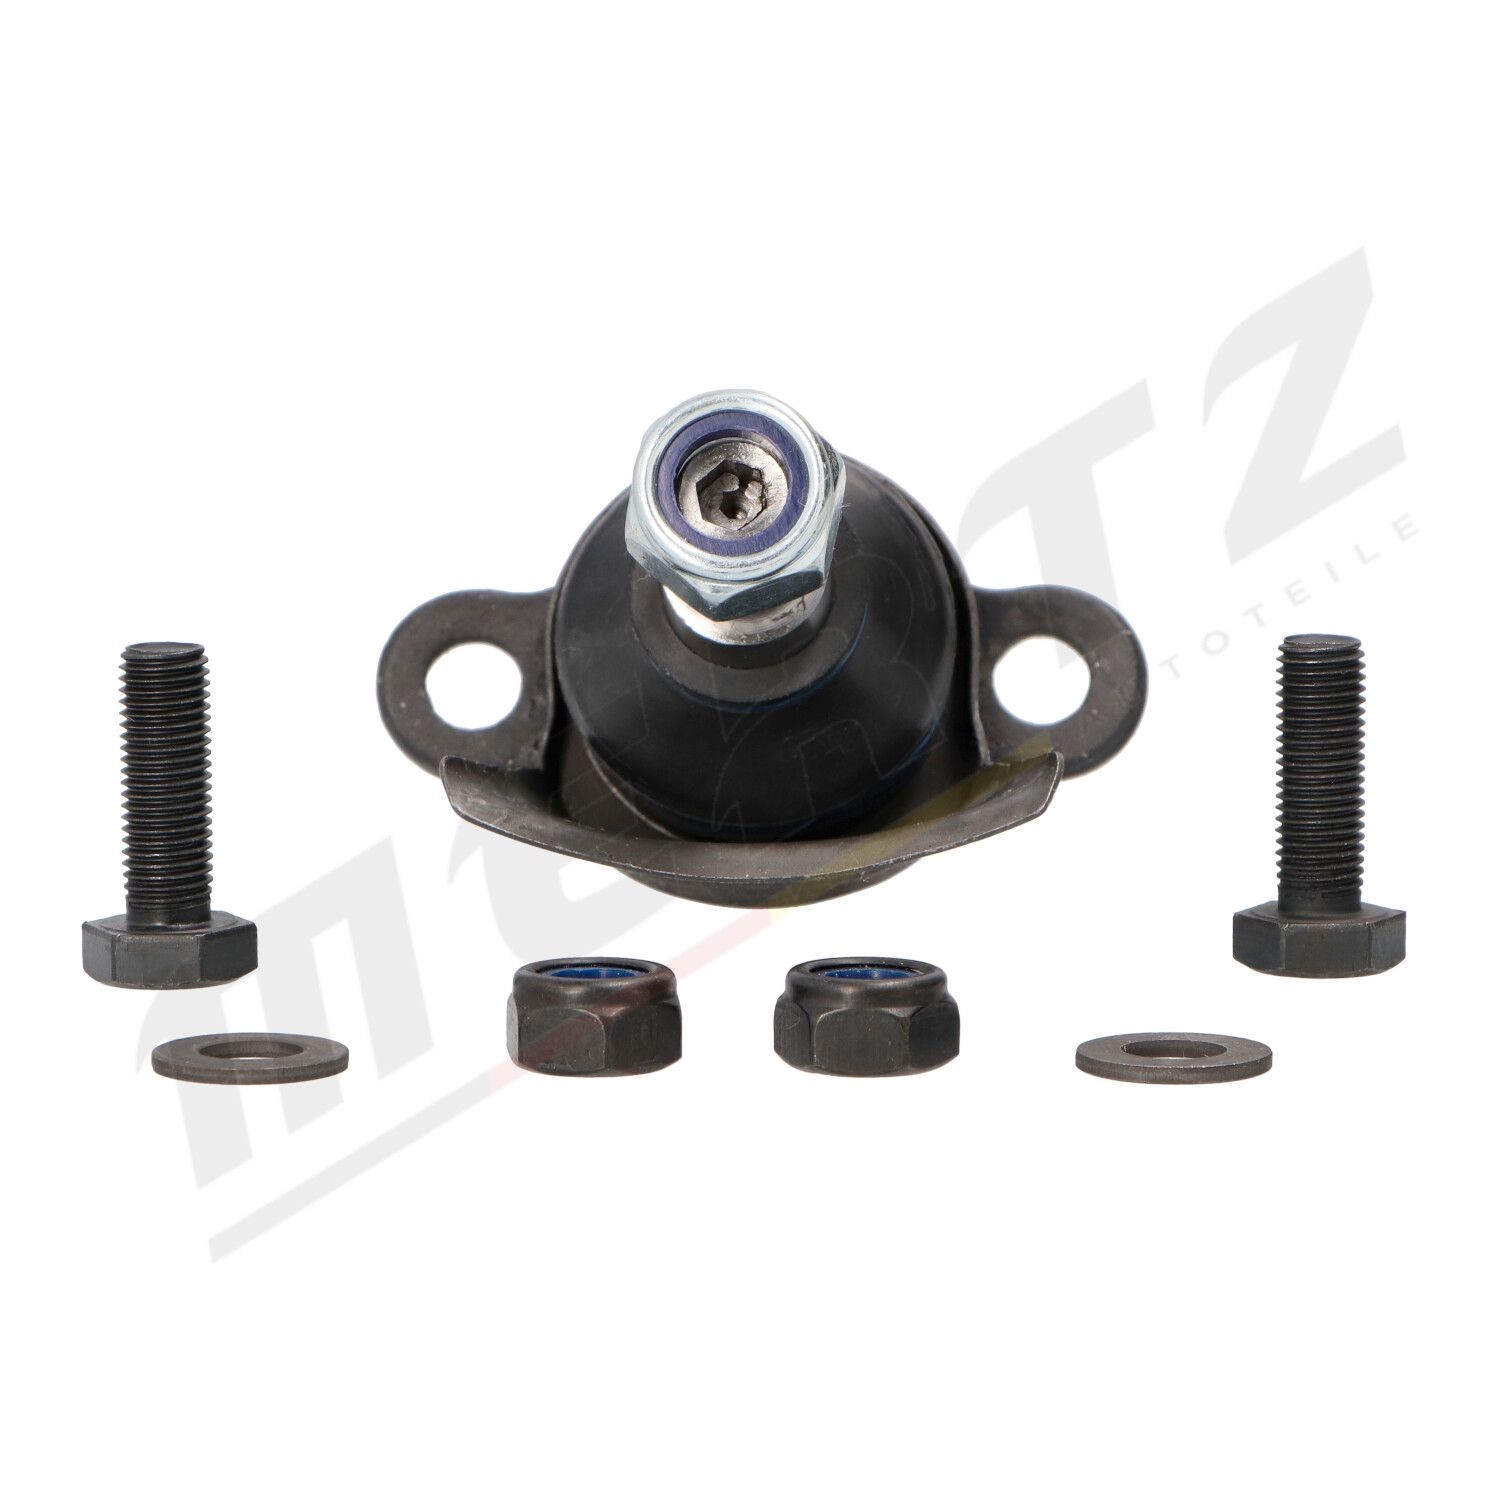 Ford Ball Joint MERTZ M-S0138 at a good price